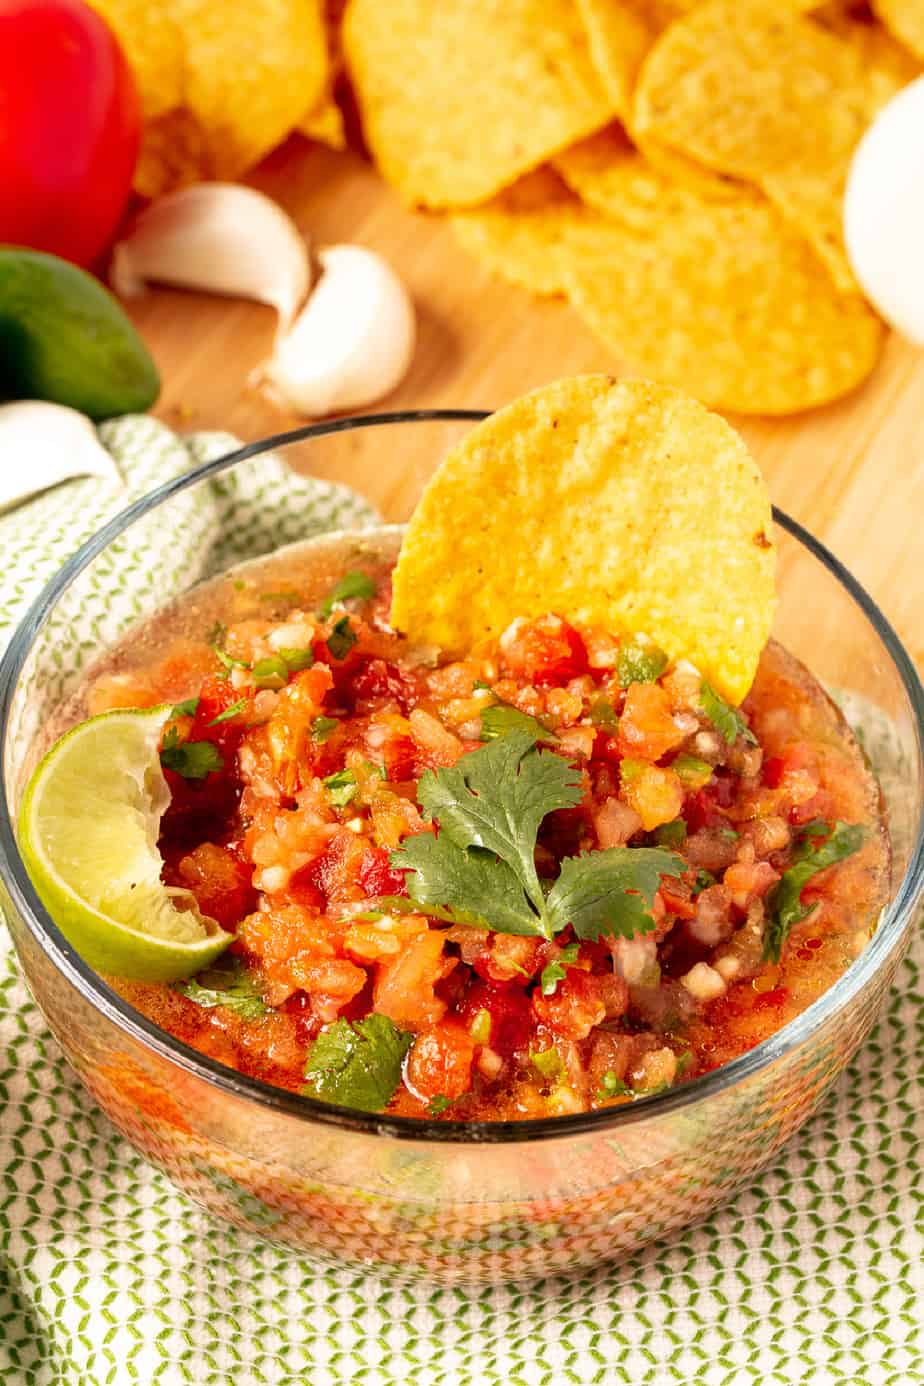 Blender salsa in a bowl with a chip from the side with more chips and fresh ingredients in the background.